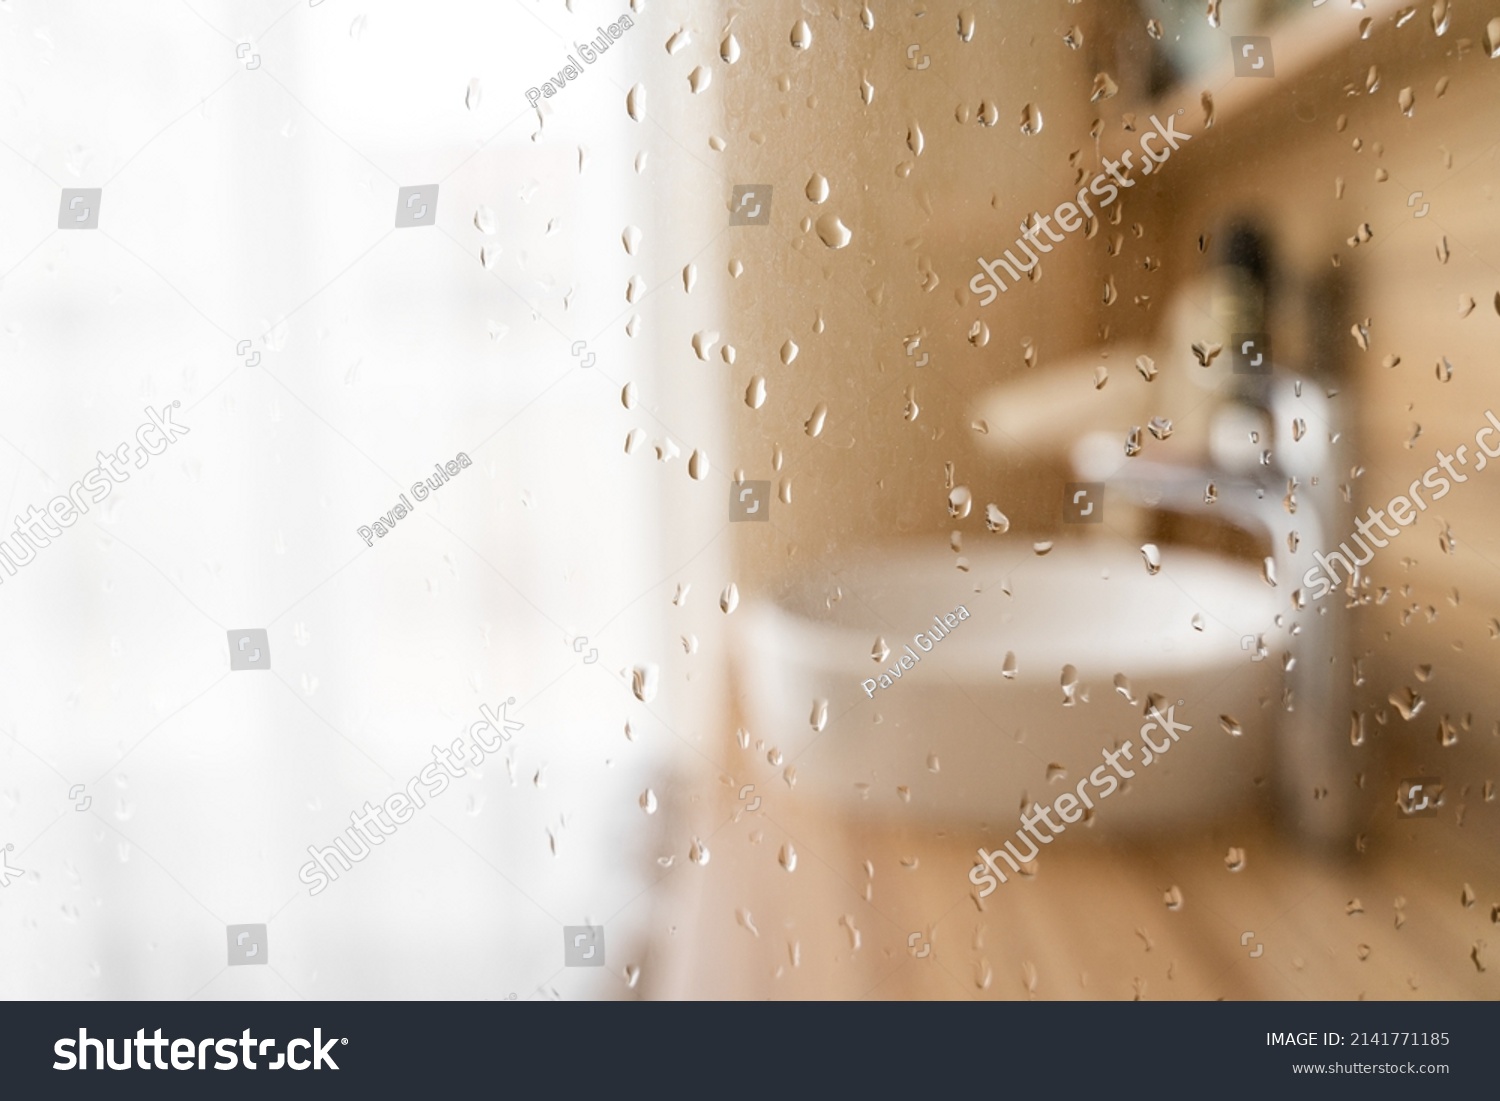 Water drops on wet glass shower door in hotel bathroom with blured bokeh window, sink, faucet and wooden furniture on sunny morning or day. Travel, holiday, vacation, interior design, body care #2141771185